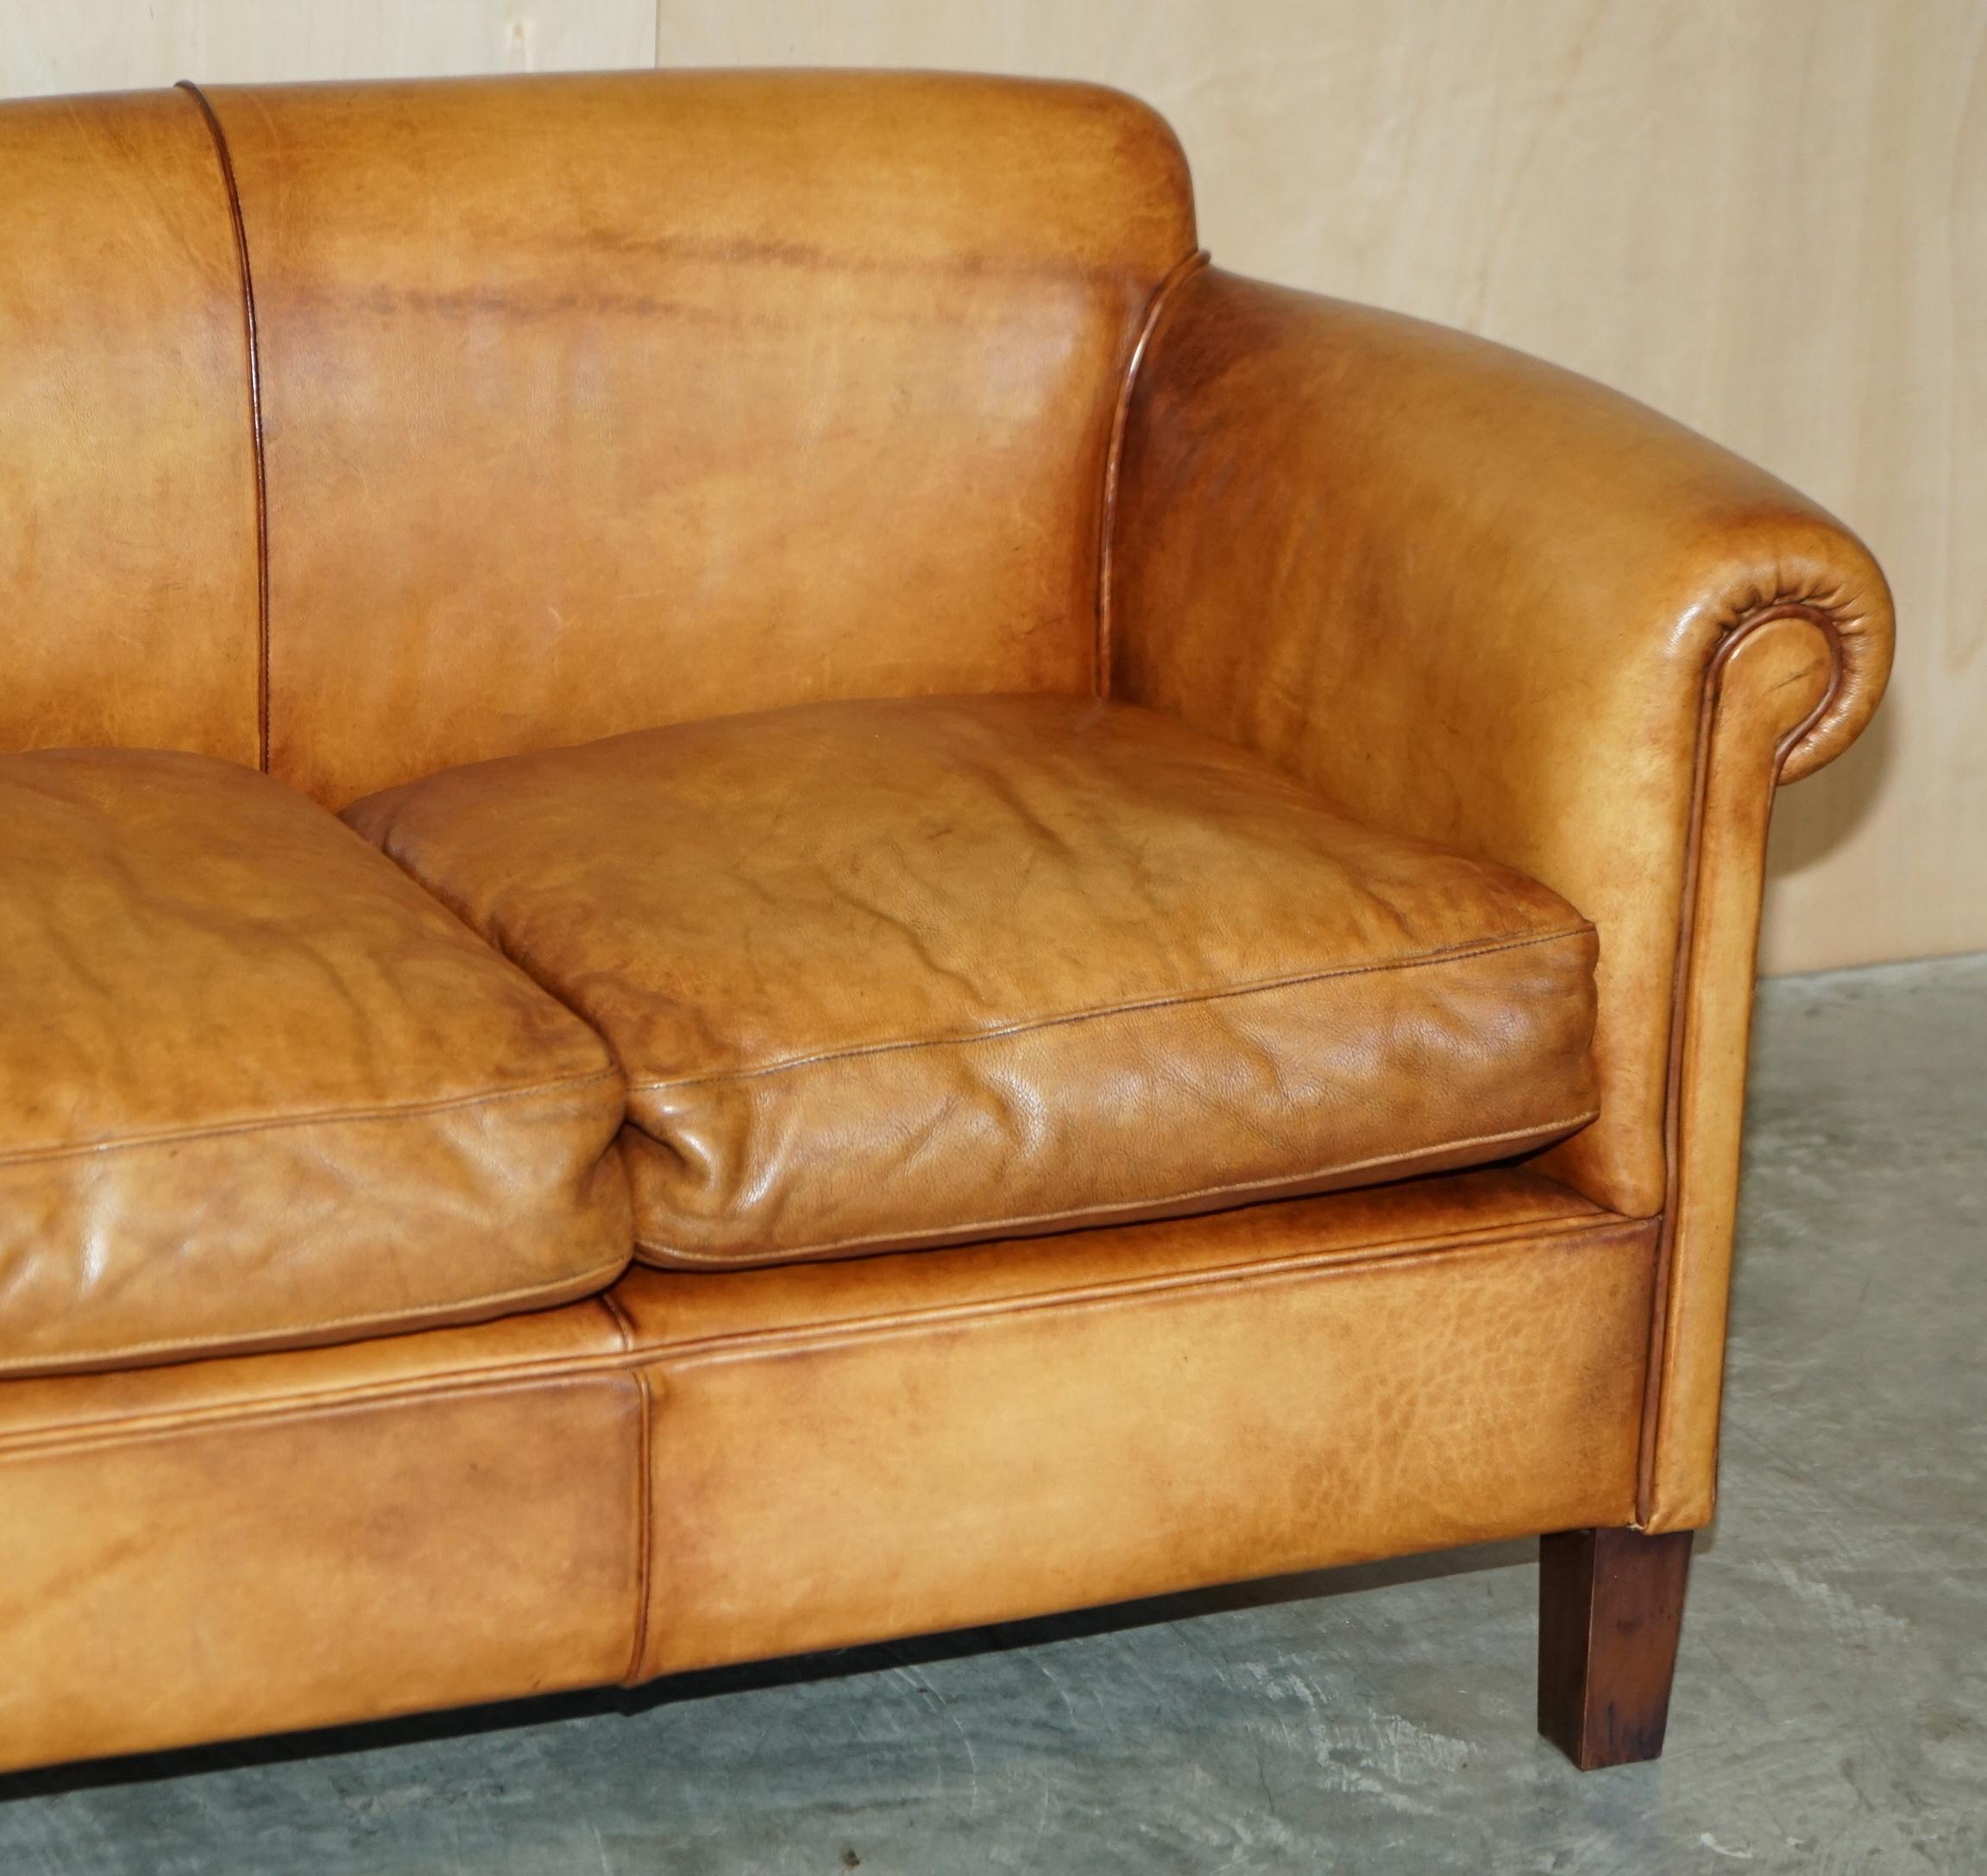 Rare John Lewis Camford Heritage Brown Leather Armchair & Two Seat Sofa Suite For Sale 4